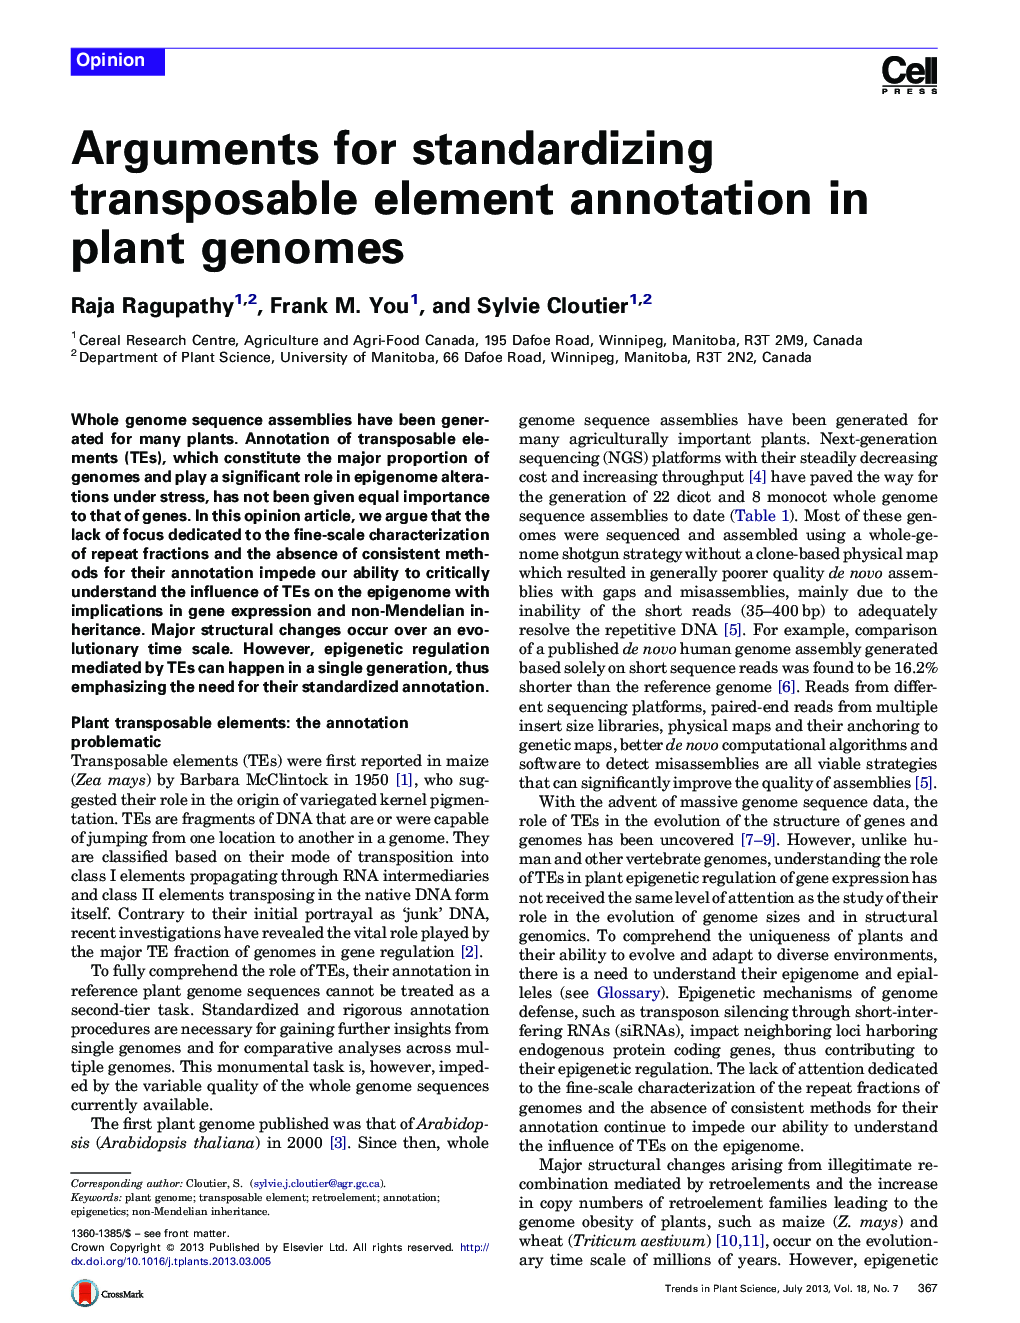 Arguments for standardizing transposable element annotation in plant genomes